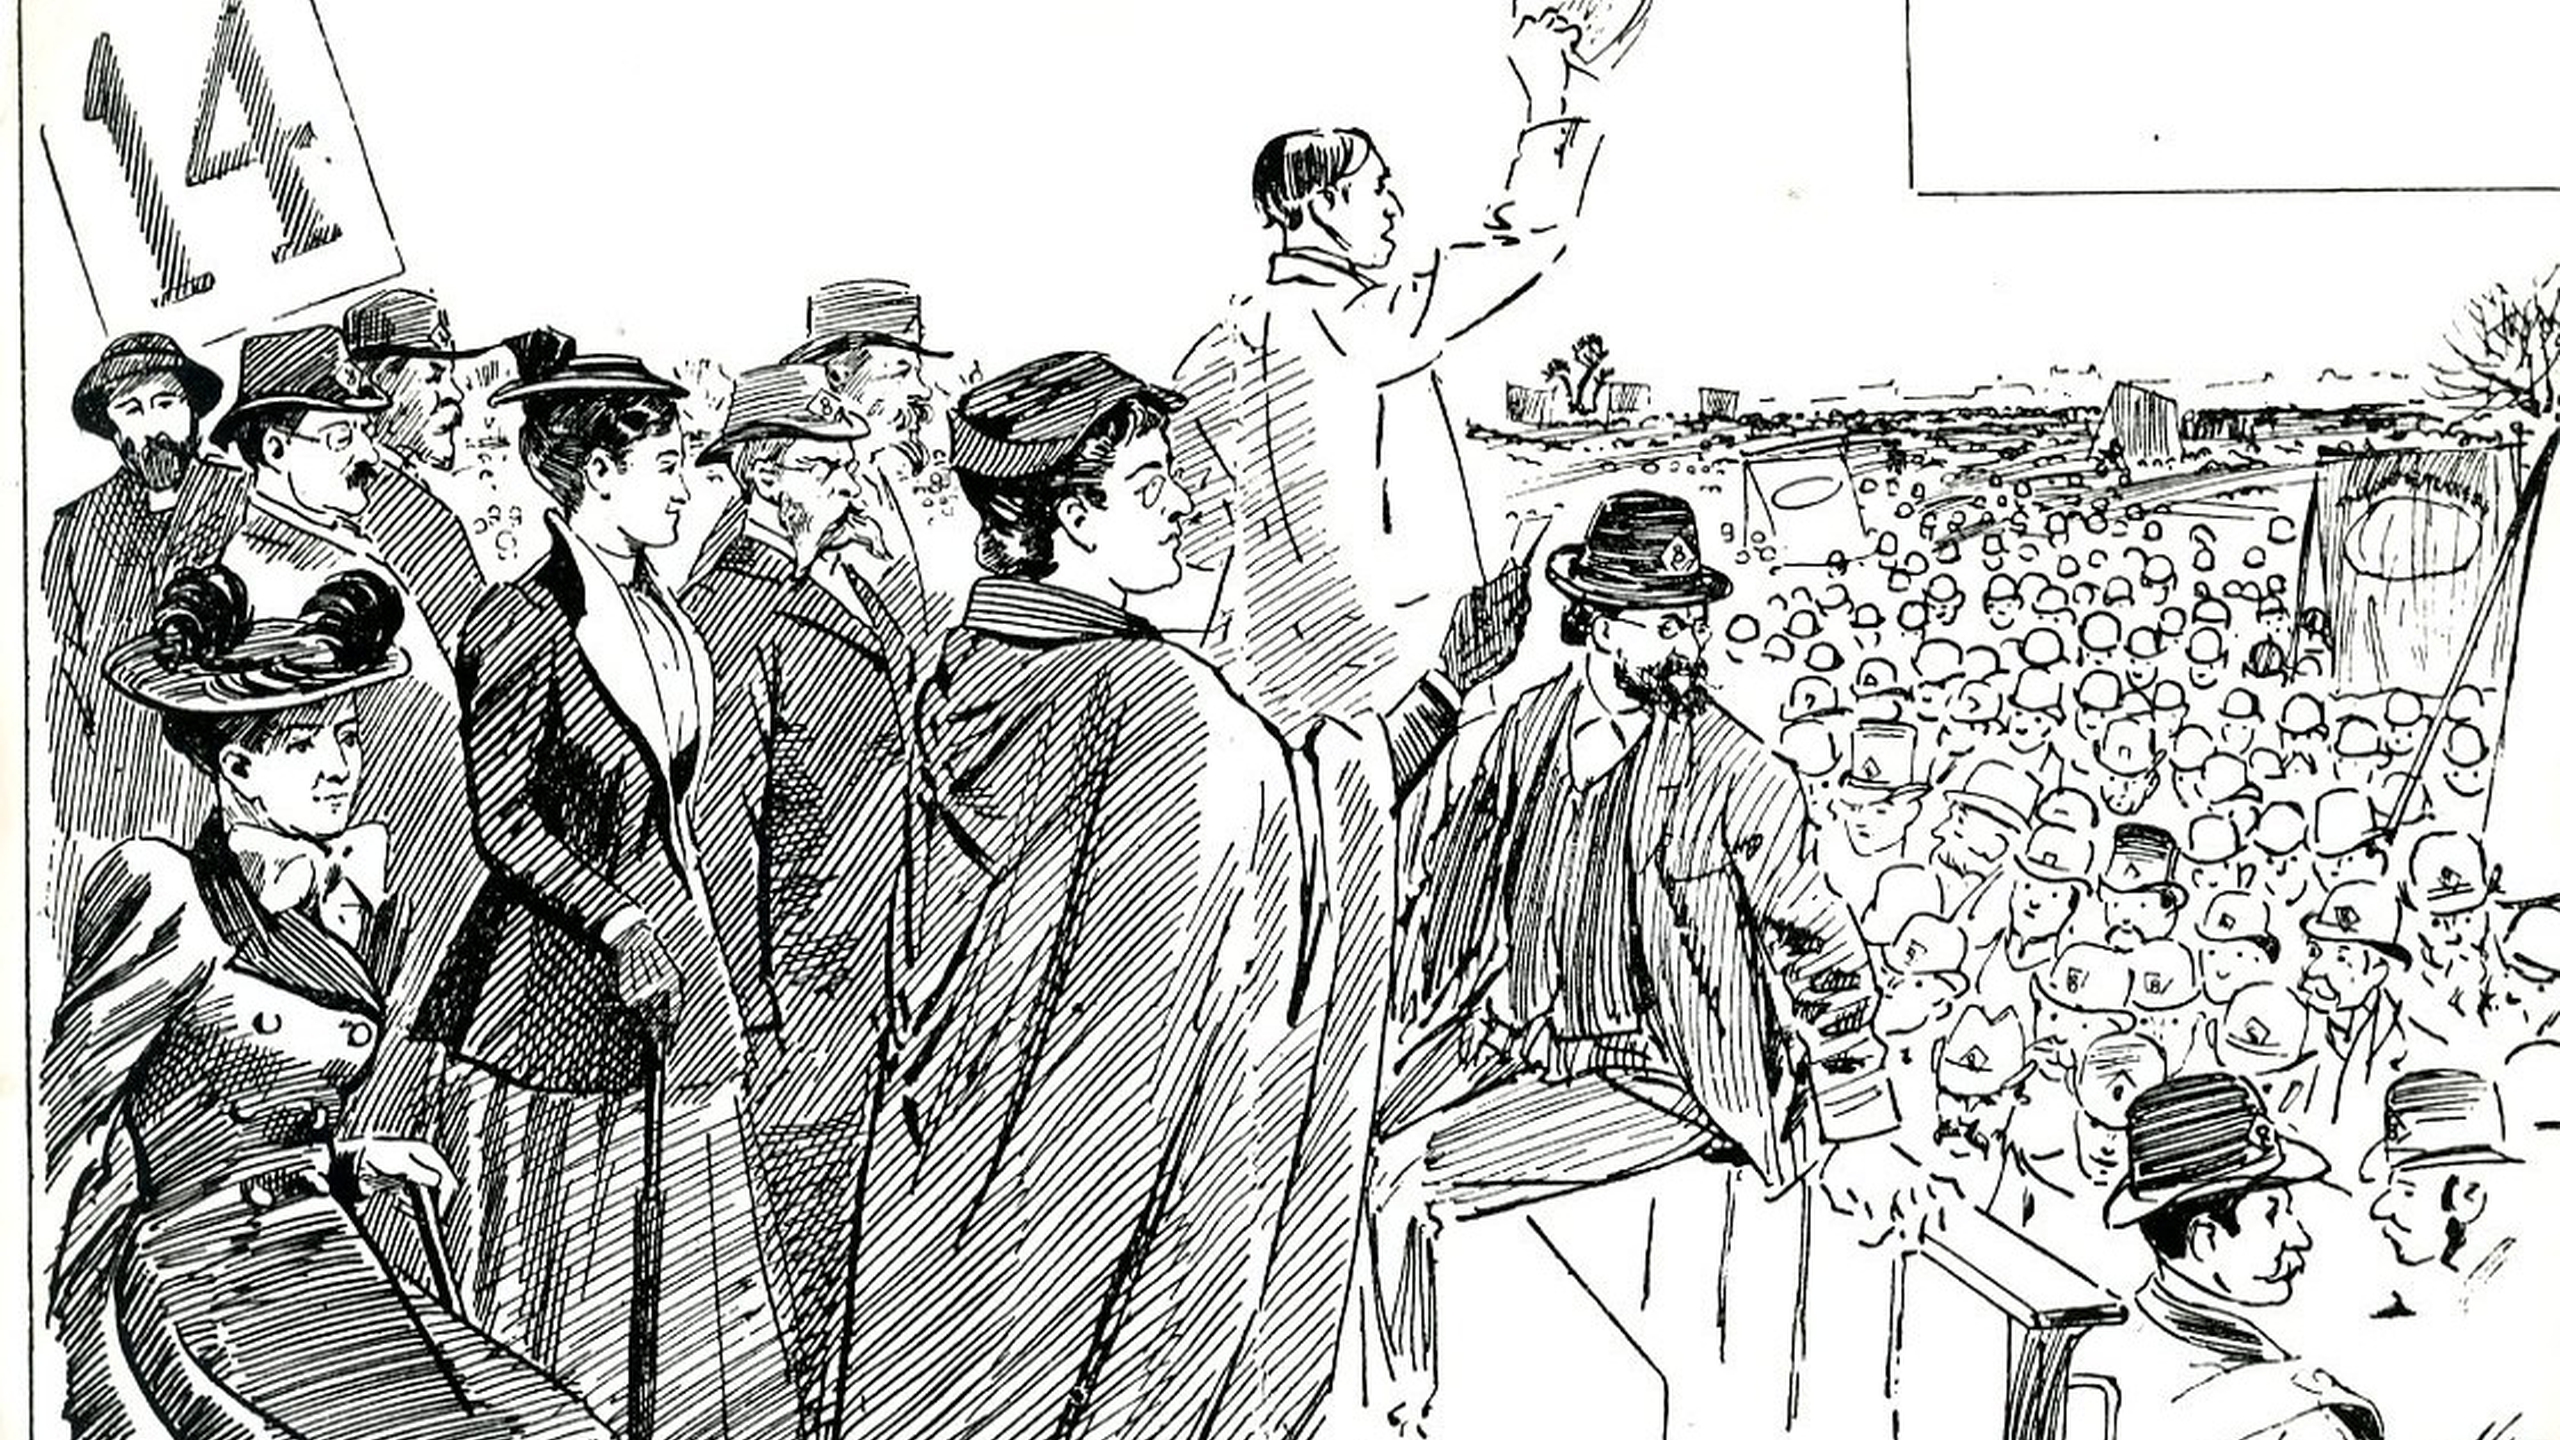 A line drawing from behind a of group of speakers, who are addressing a crowd at an outdoor rally. There are three men and three women on the platform.